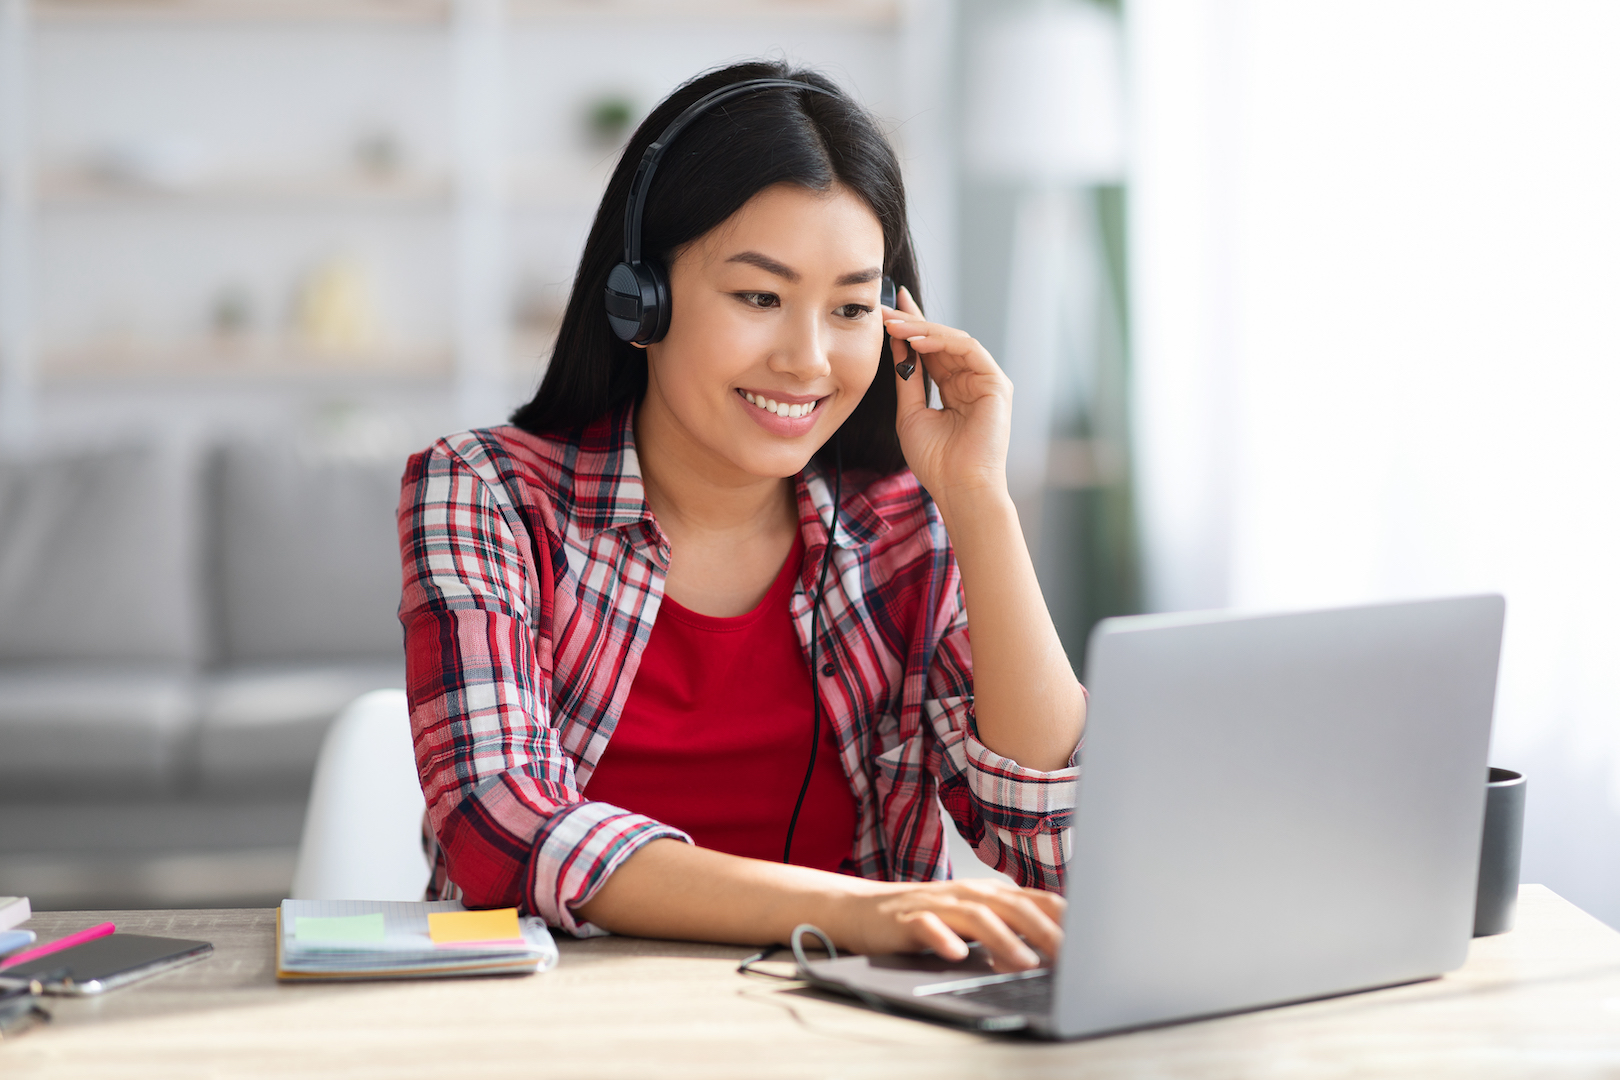 Distance Learning. Cheerful Asian Woman In Headset Studying With Laptop At Home